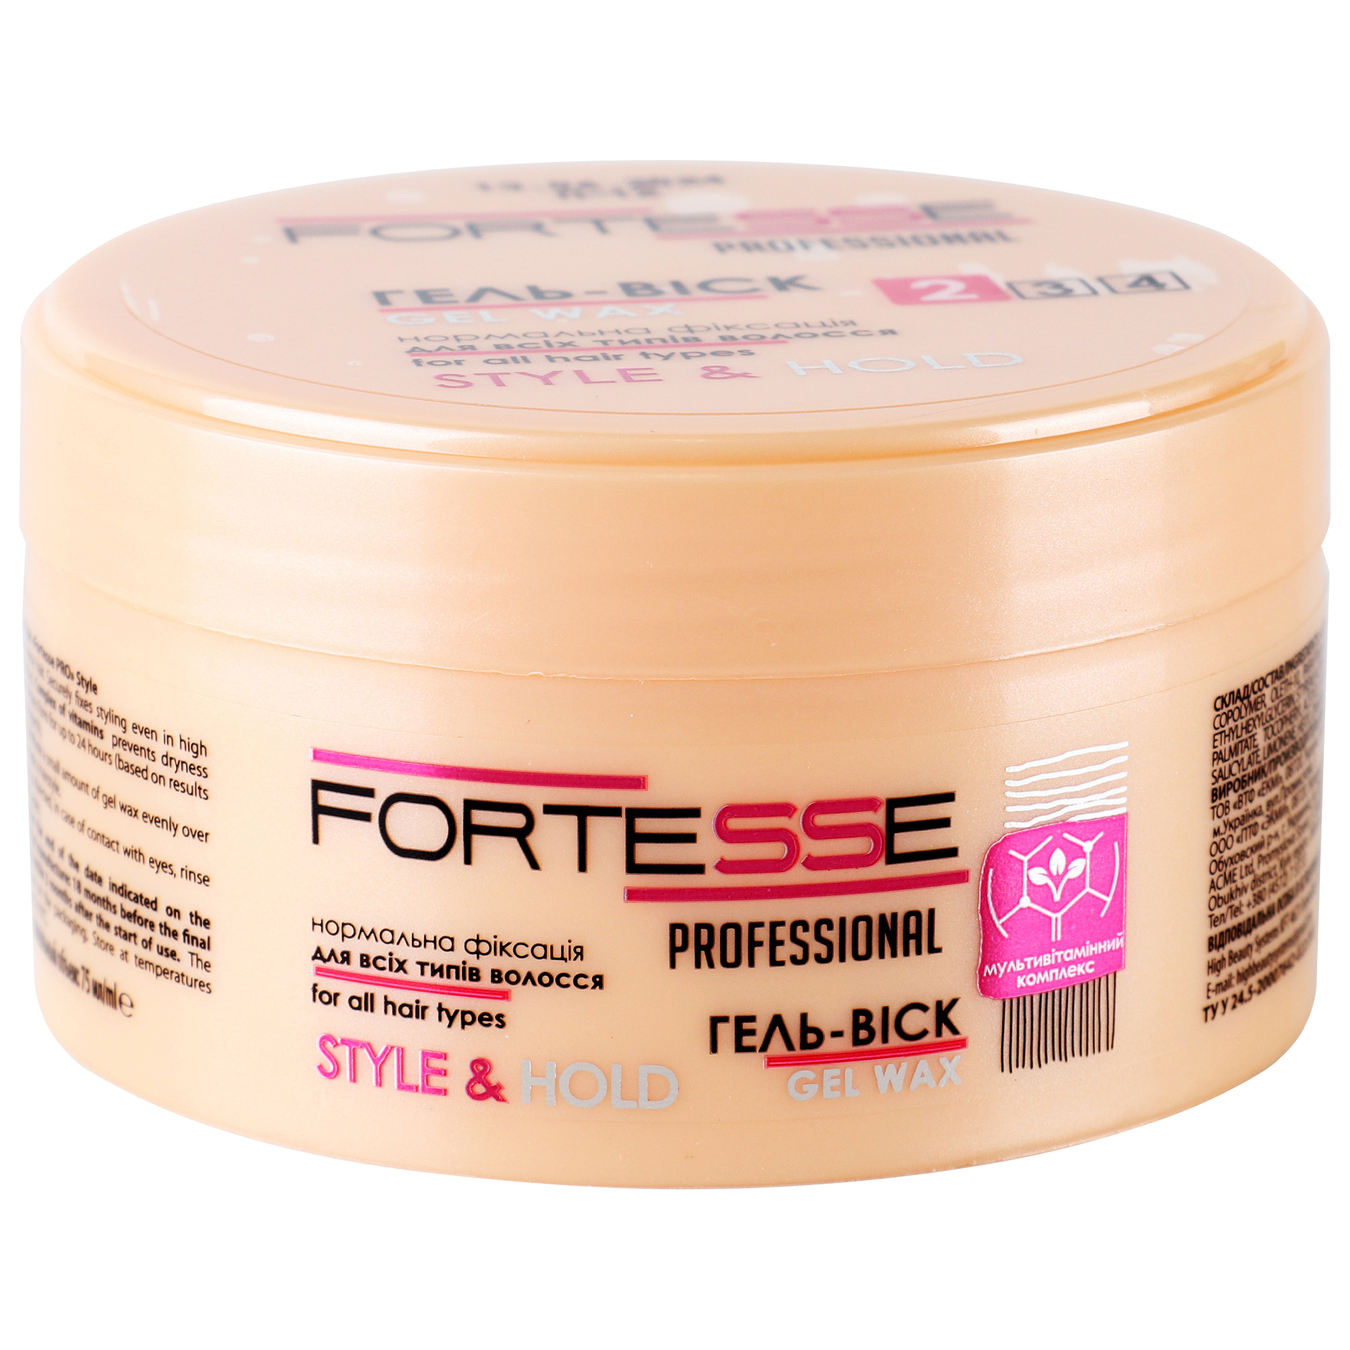 Gel-wax Fortesse Pro Style of normal fixation for hair 75 ml 4